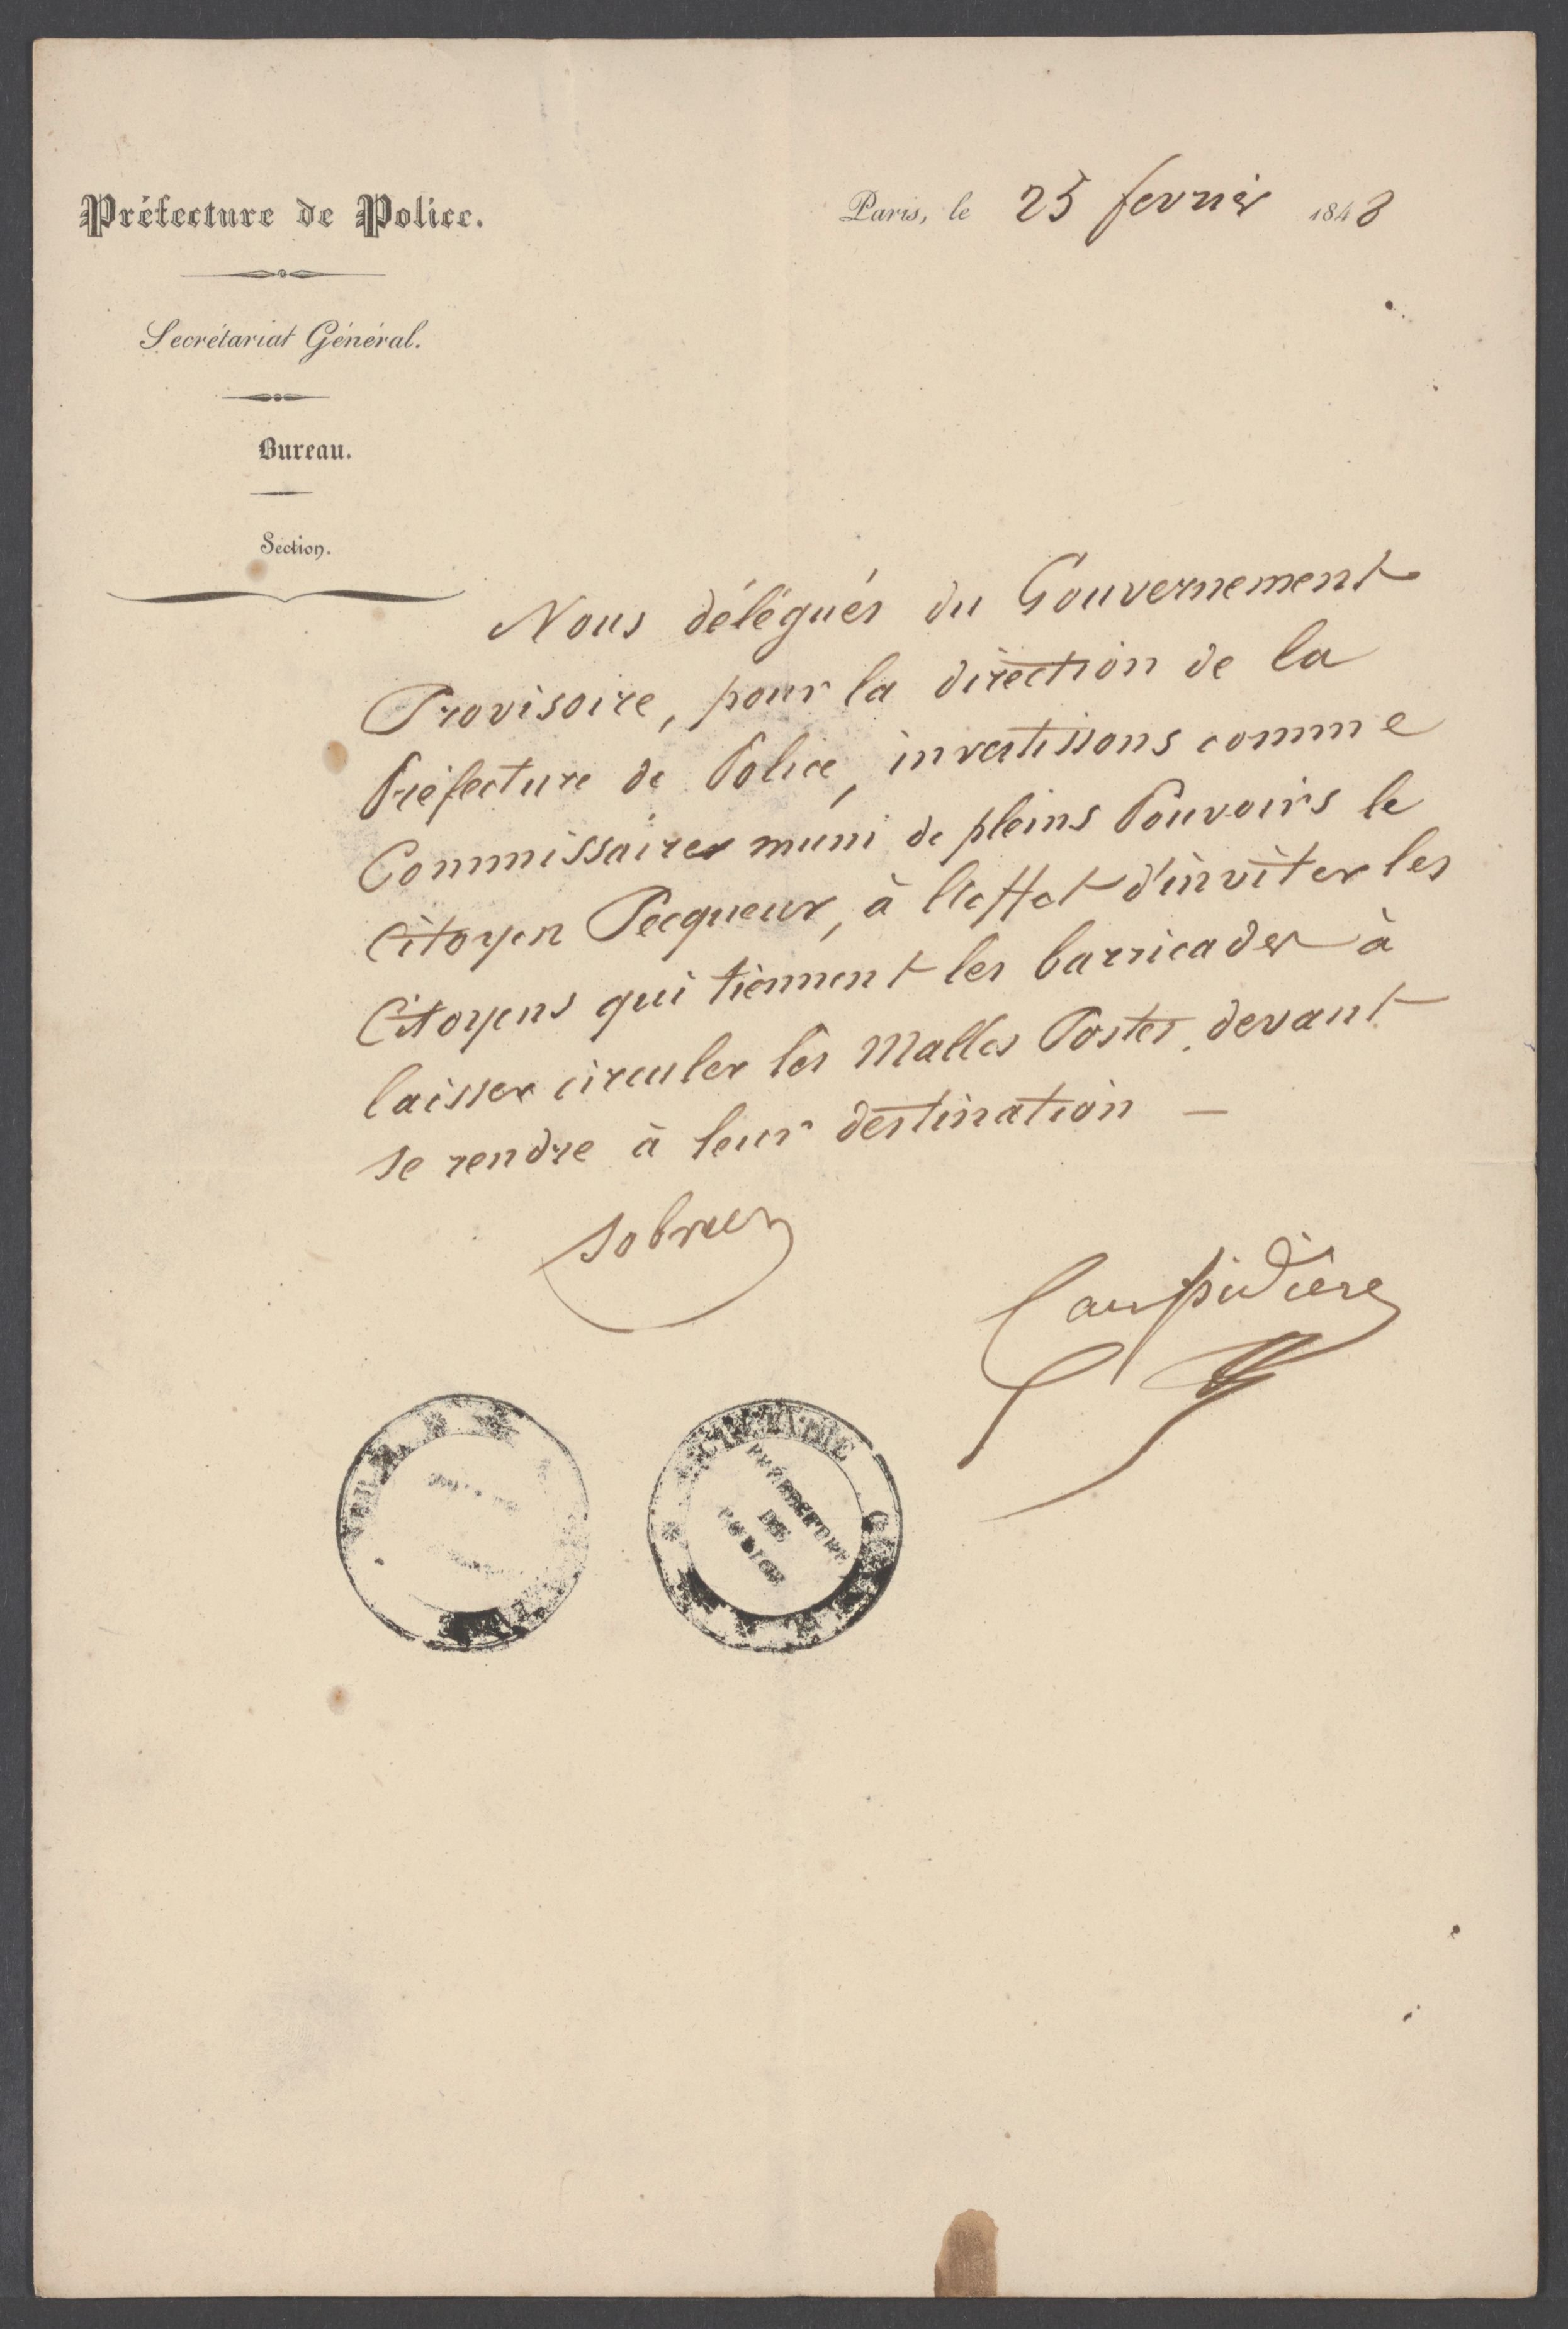 Internationaal Instituut voor Sociale Geschiedenis,  The police prefecture gave to revolutionary Constantin Pecqueur the role of Commissioner, 25 february 1848, avalaible here
